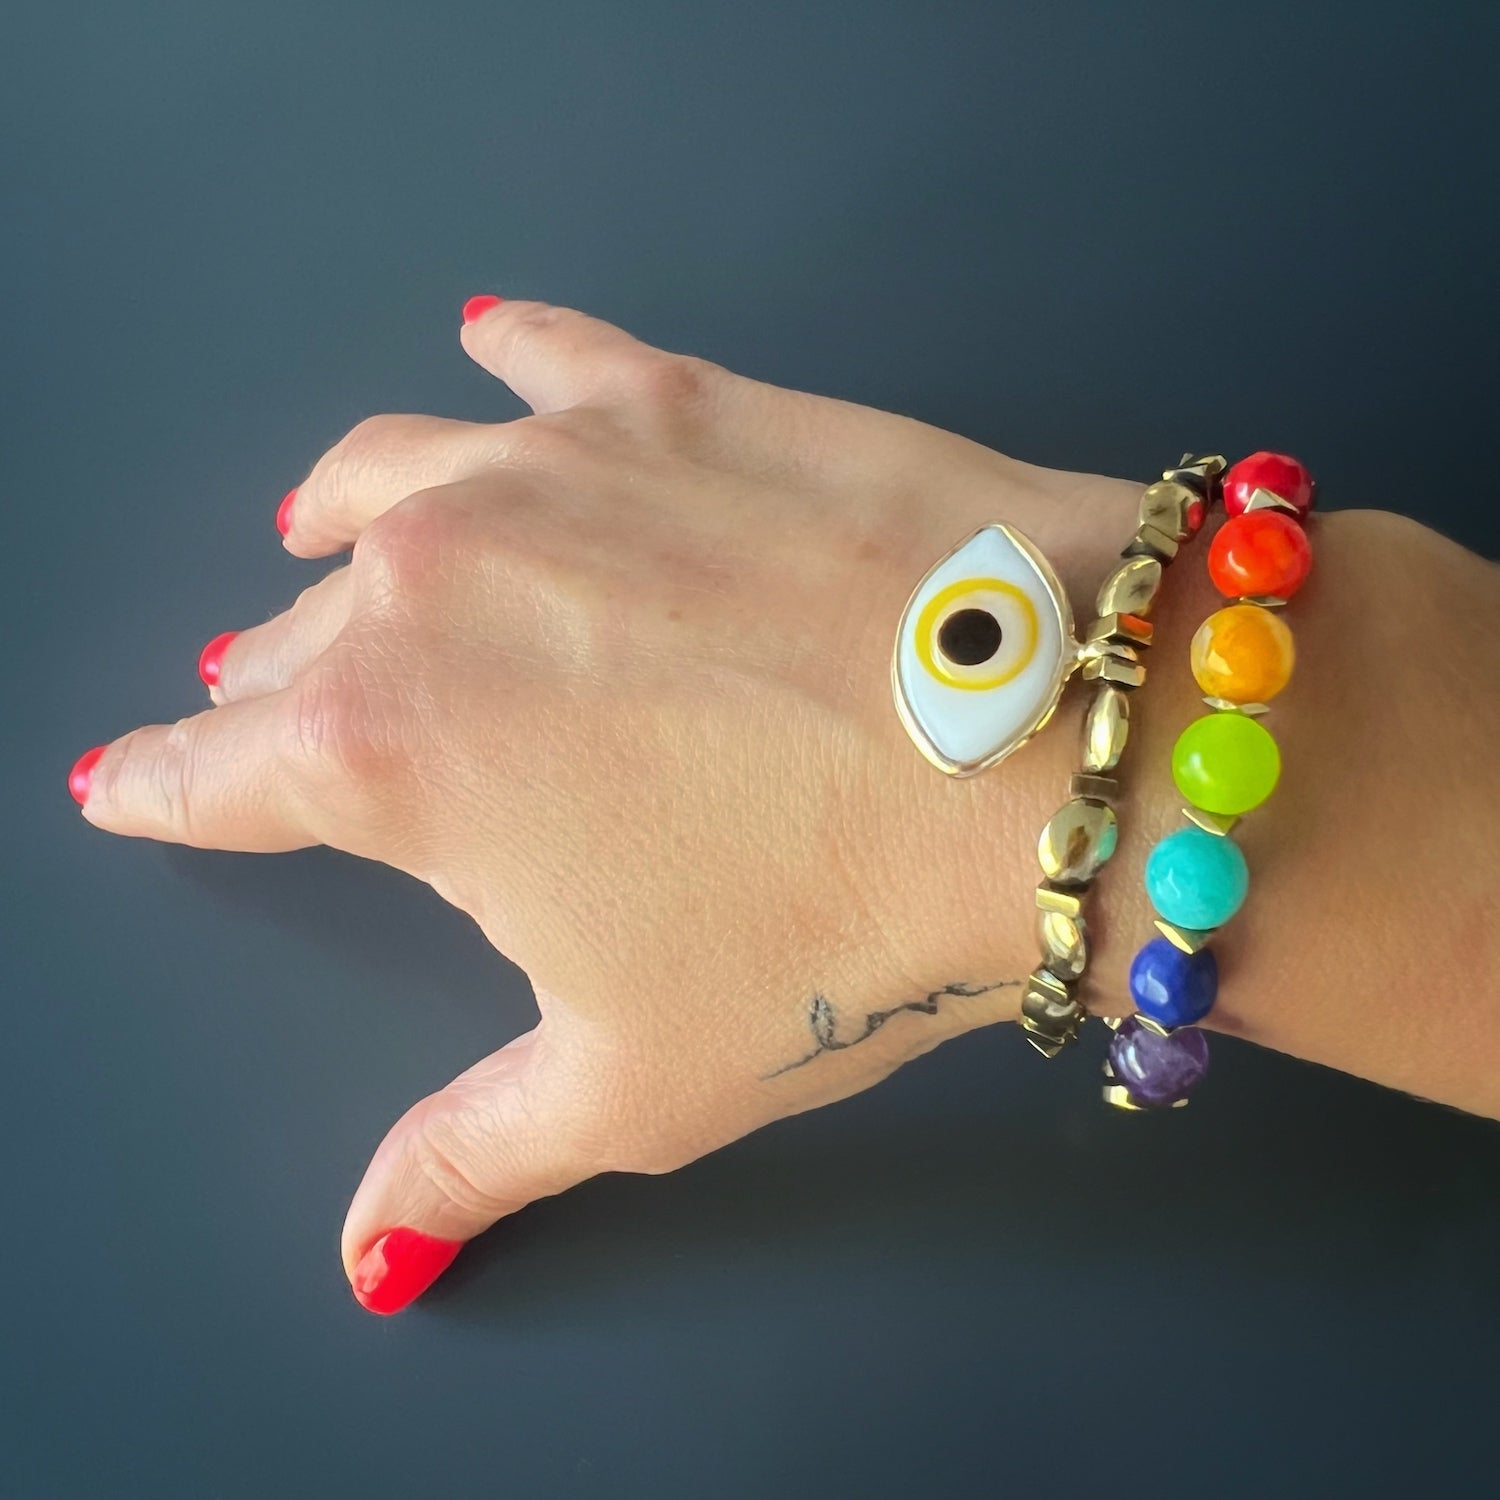 With the Yellow Evil Eye Bracelet on her wrist, the hand model embodies the elegance and power associated with this unique accessory.